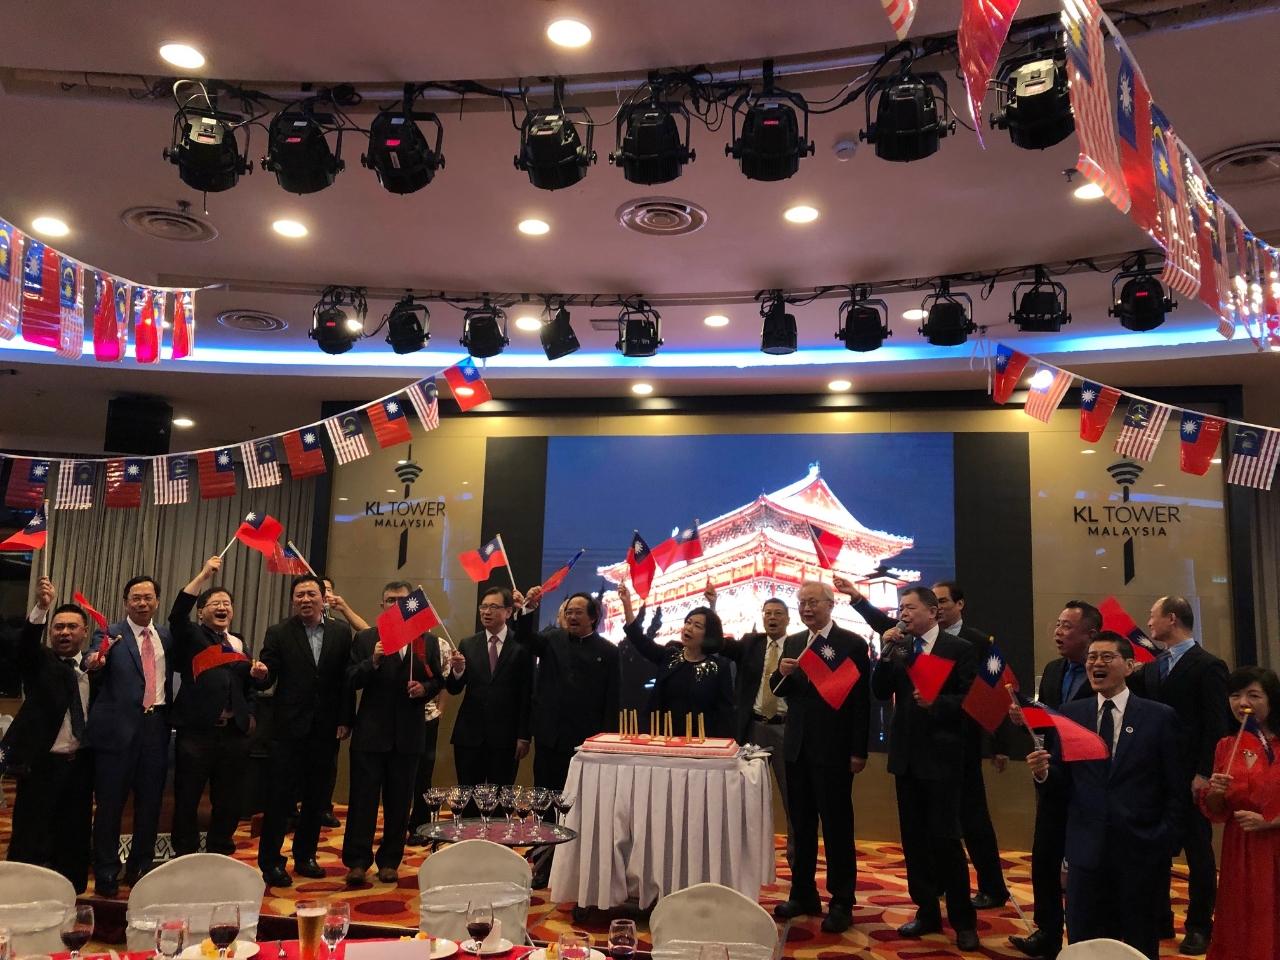 Representative Anne Hung (center) and the distinguished guests wave the flags of the Republic of China and sing “Ode to the Republic of China" together.